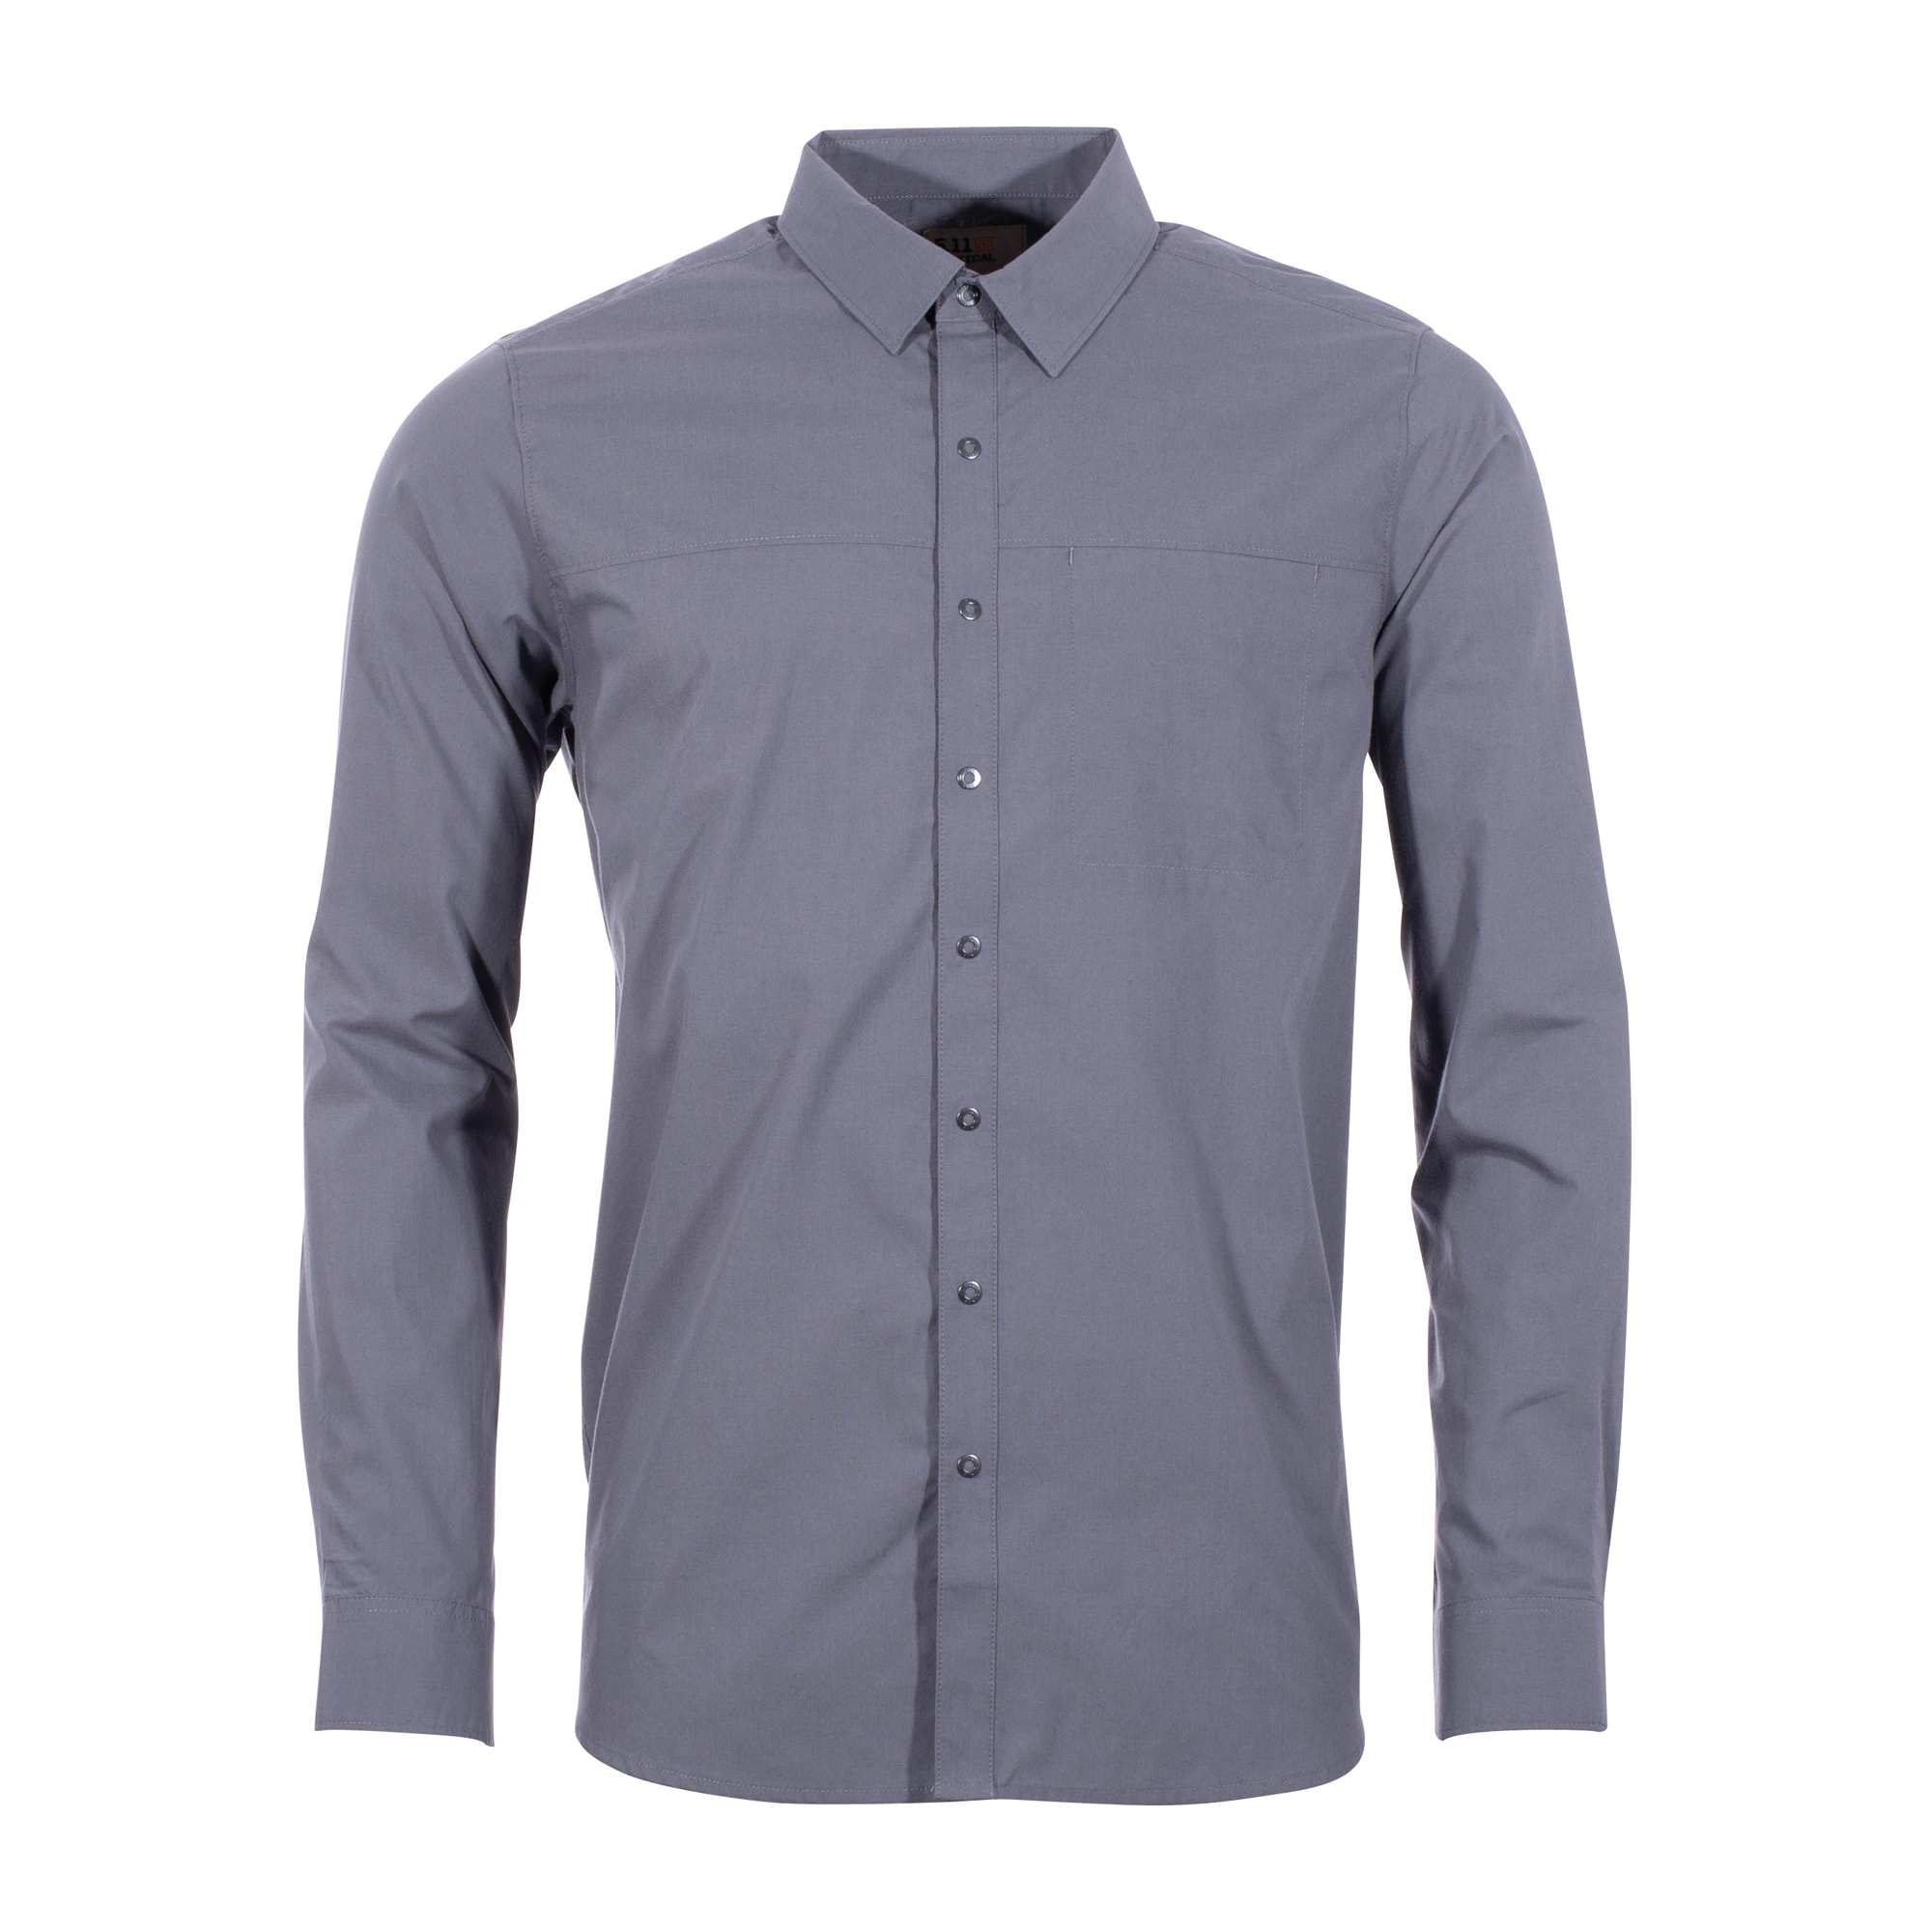 Purchase the 5.11 Igor Solid Long Sleeve Shirt gray by ASMC